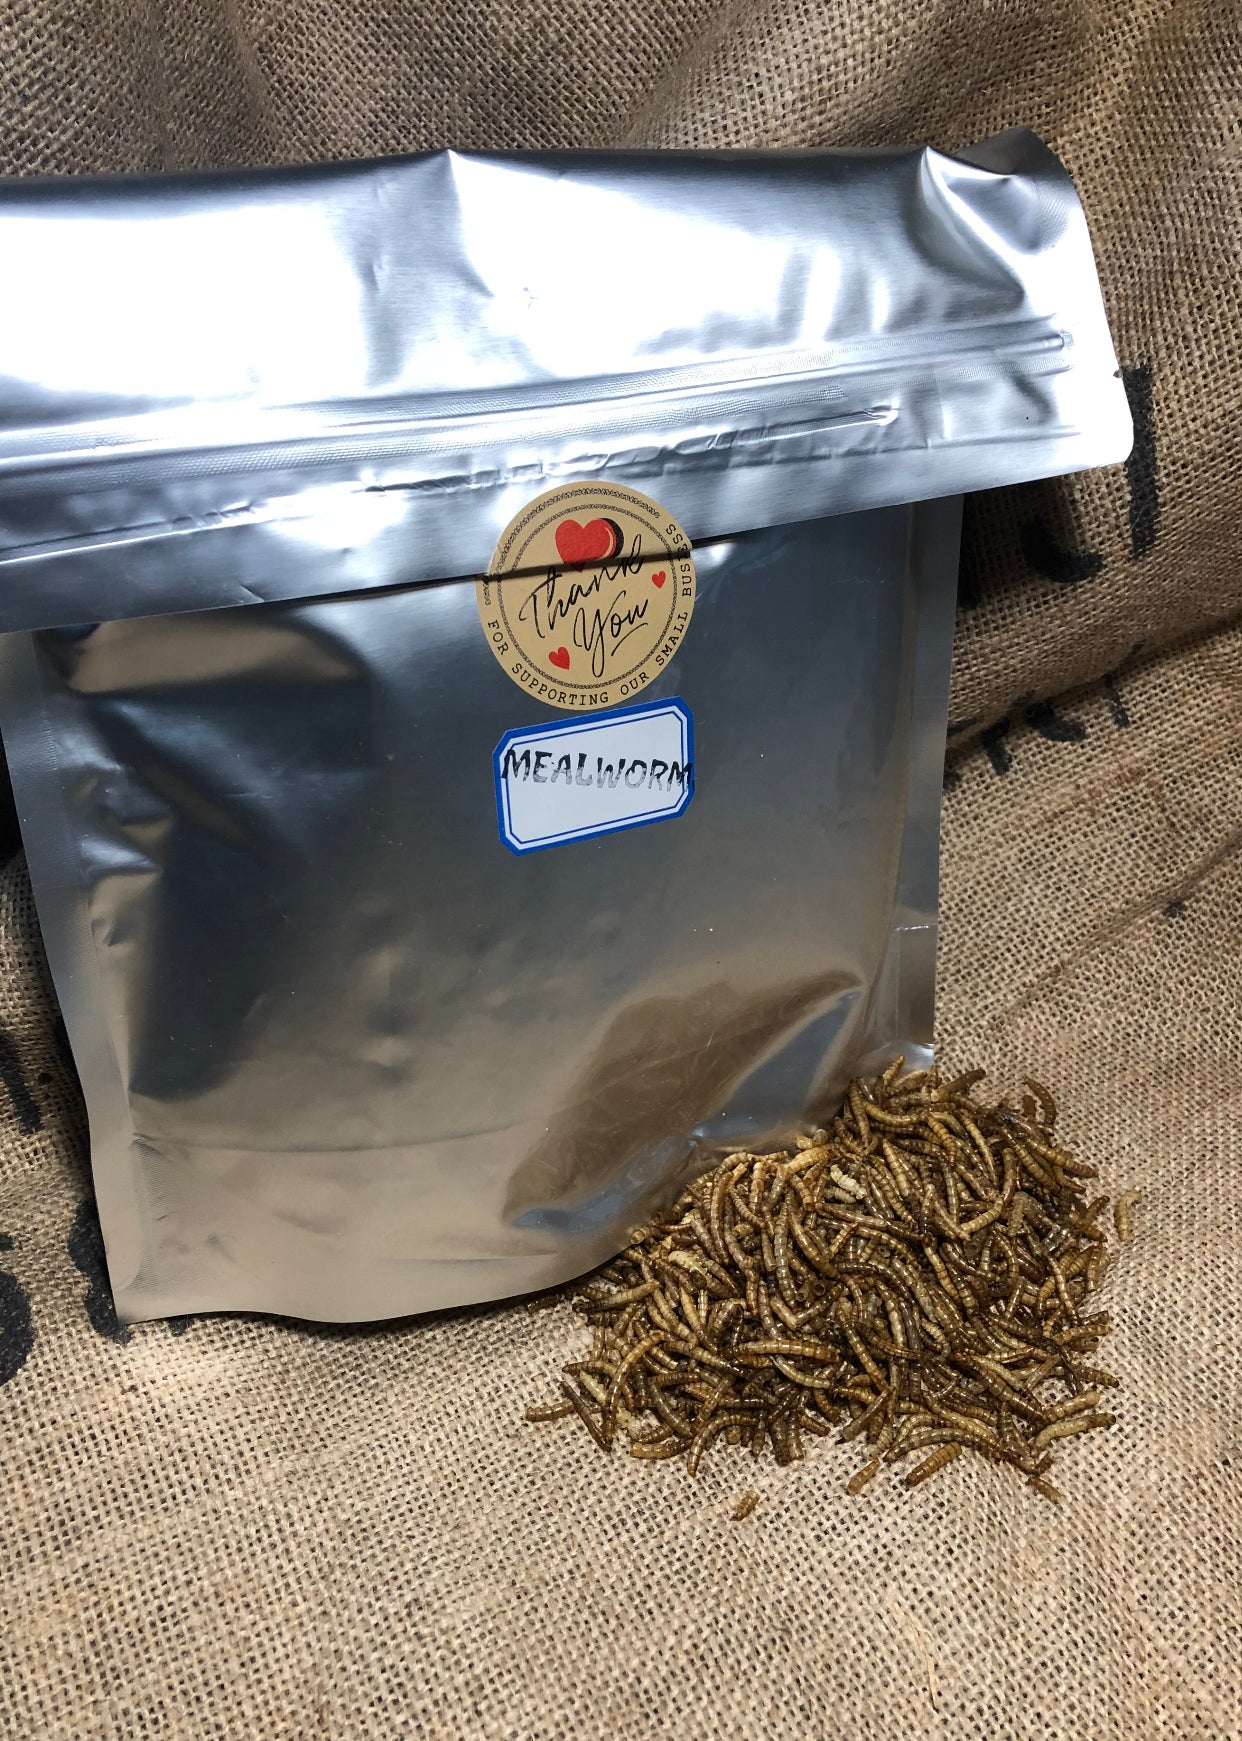 Dried Mealworms - Chicken and Duck Treats